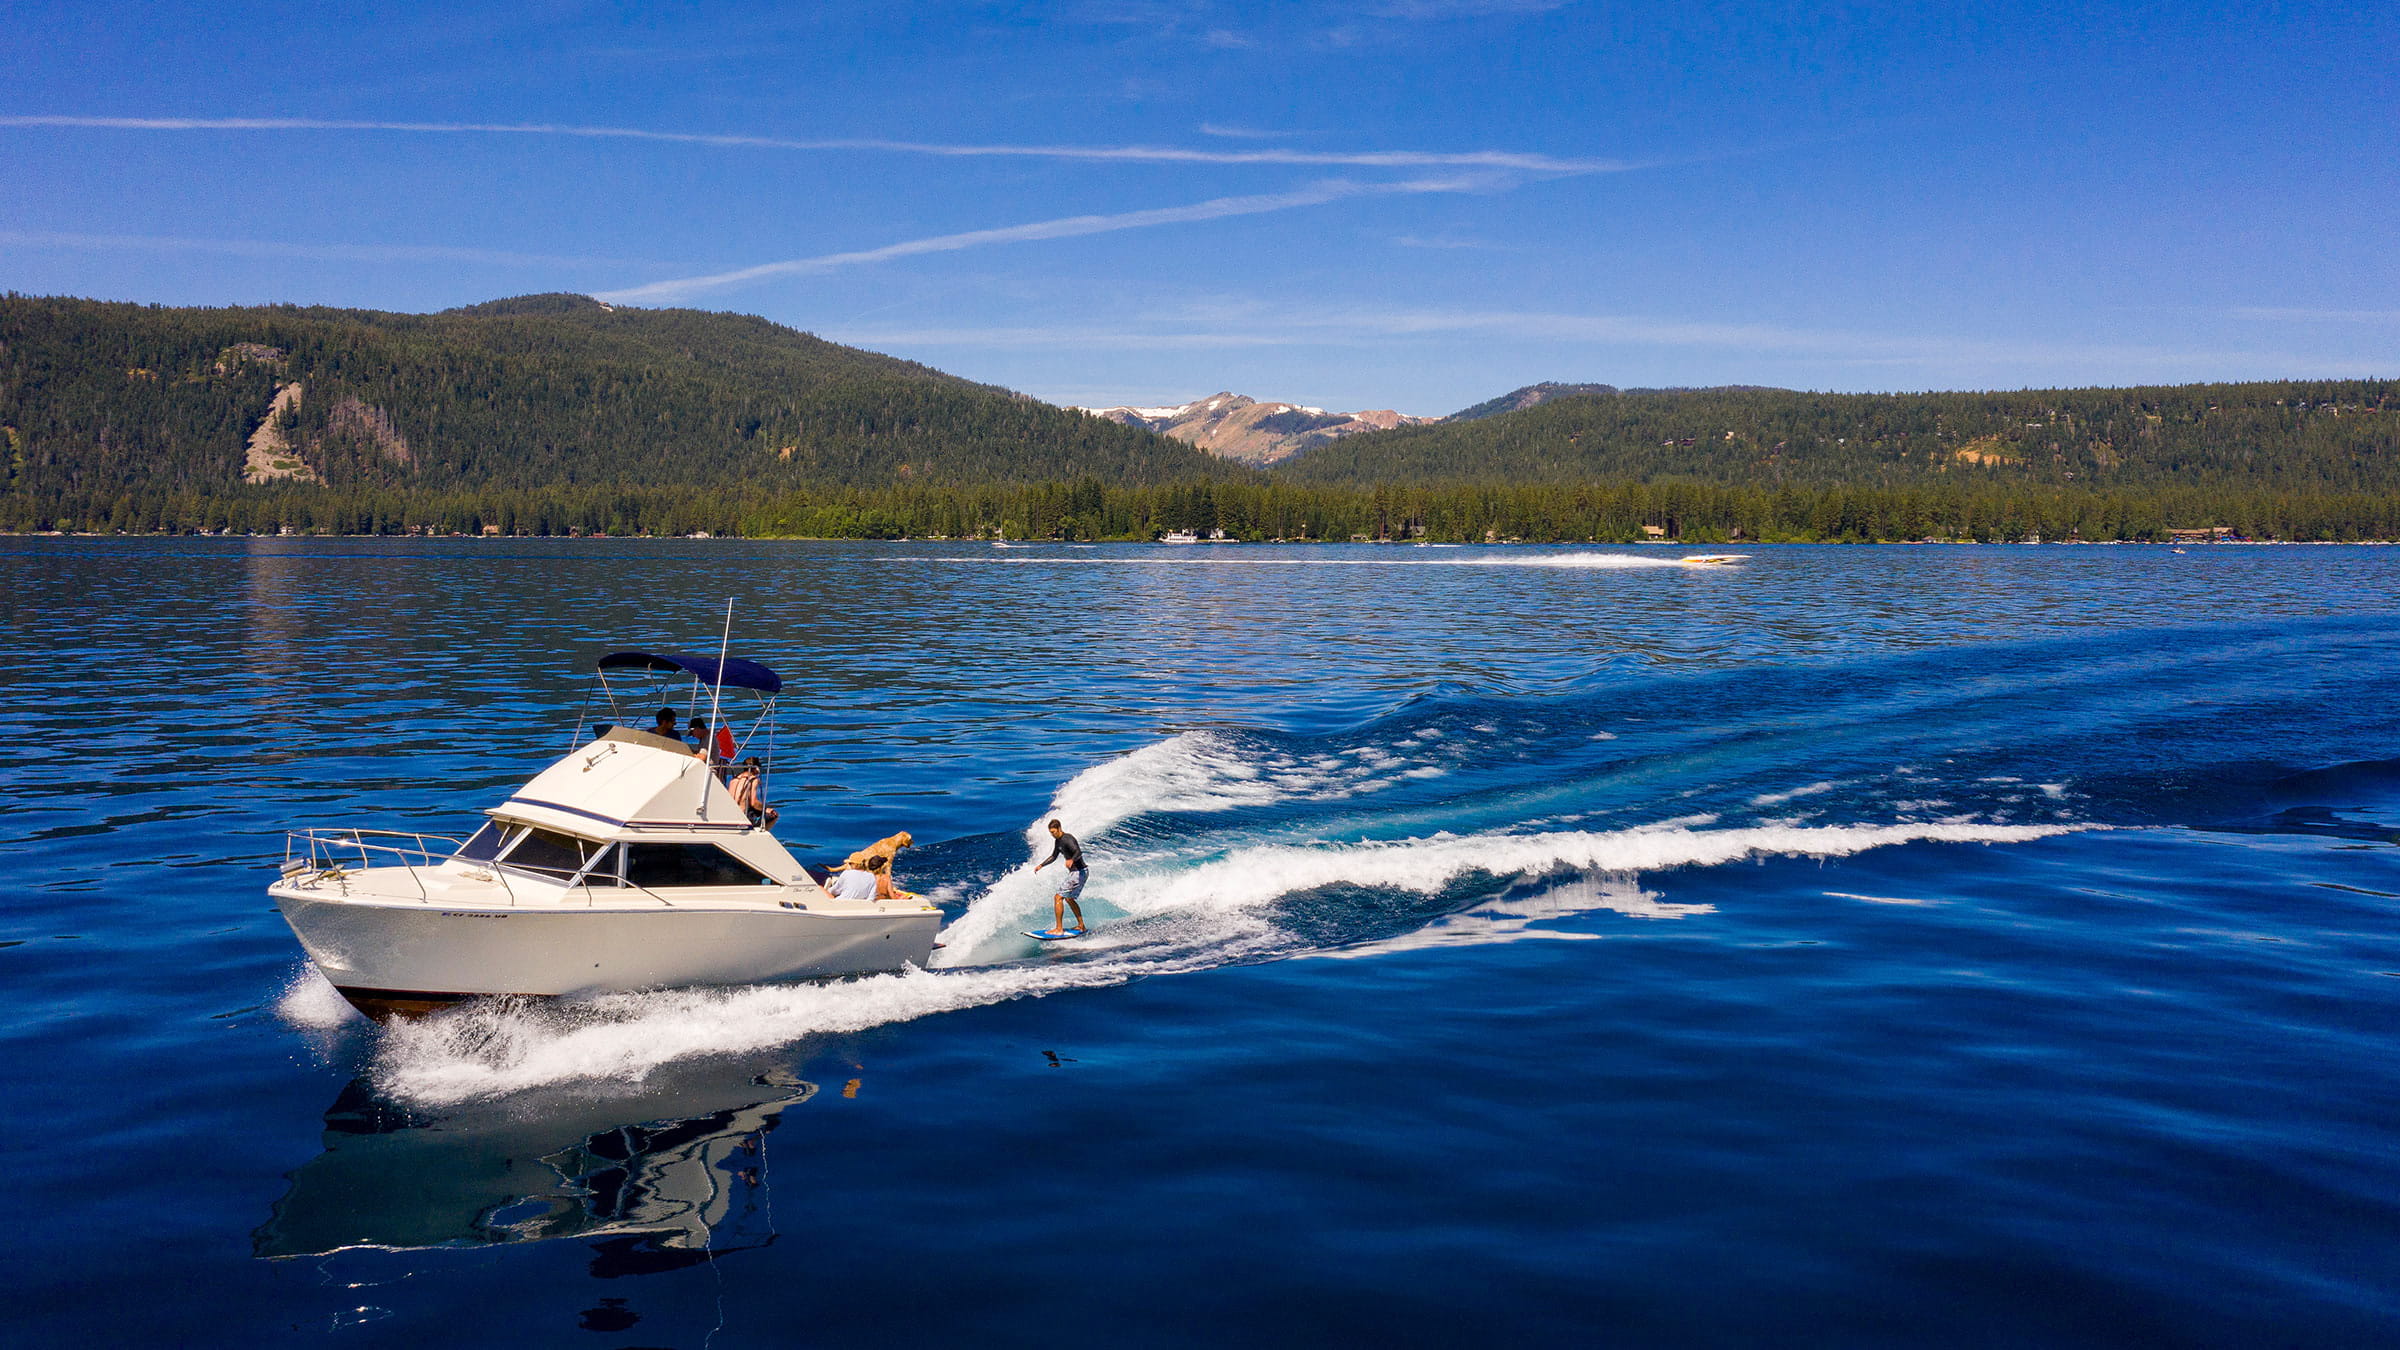 Group of friends wake surfing off a boat in Lake Tahoe during summer